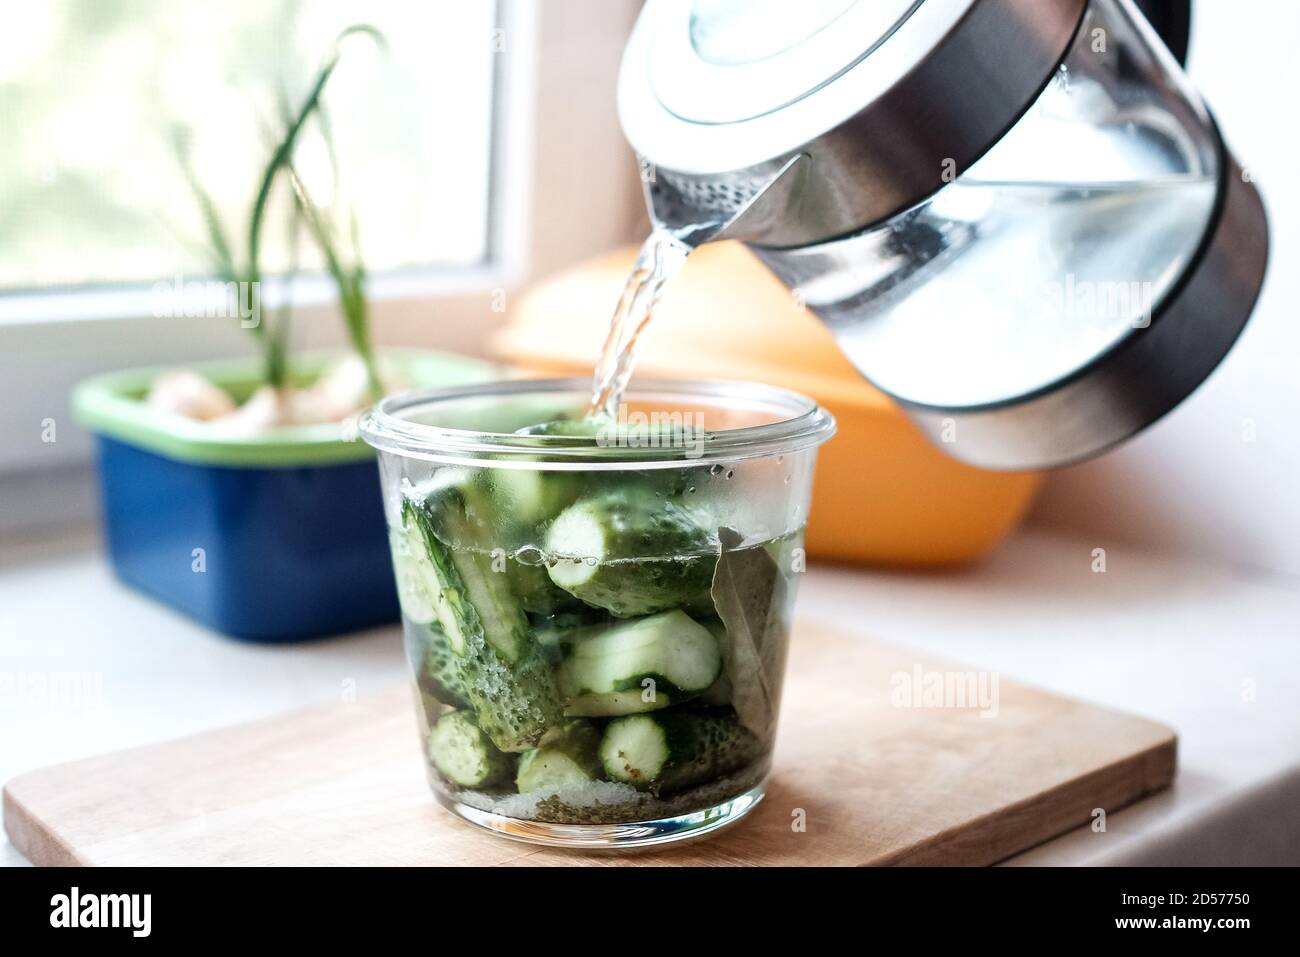 Pickling cucumbers. Pour boiling water into a glass jar. Stock Photo